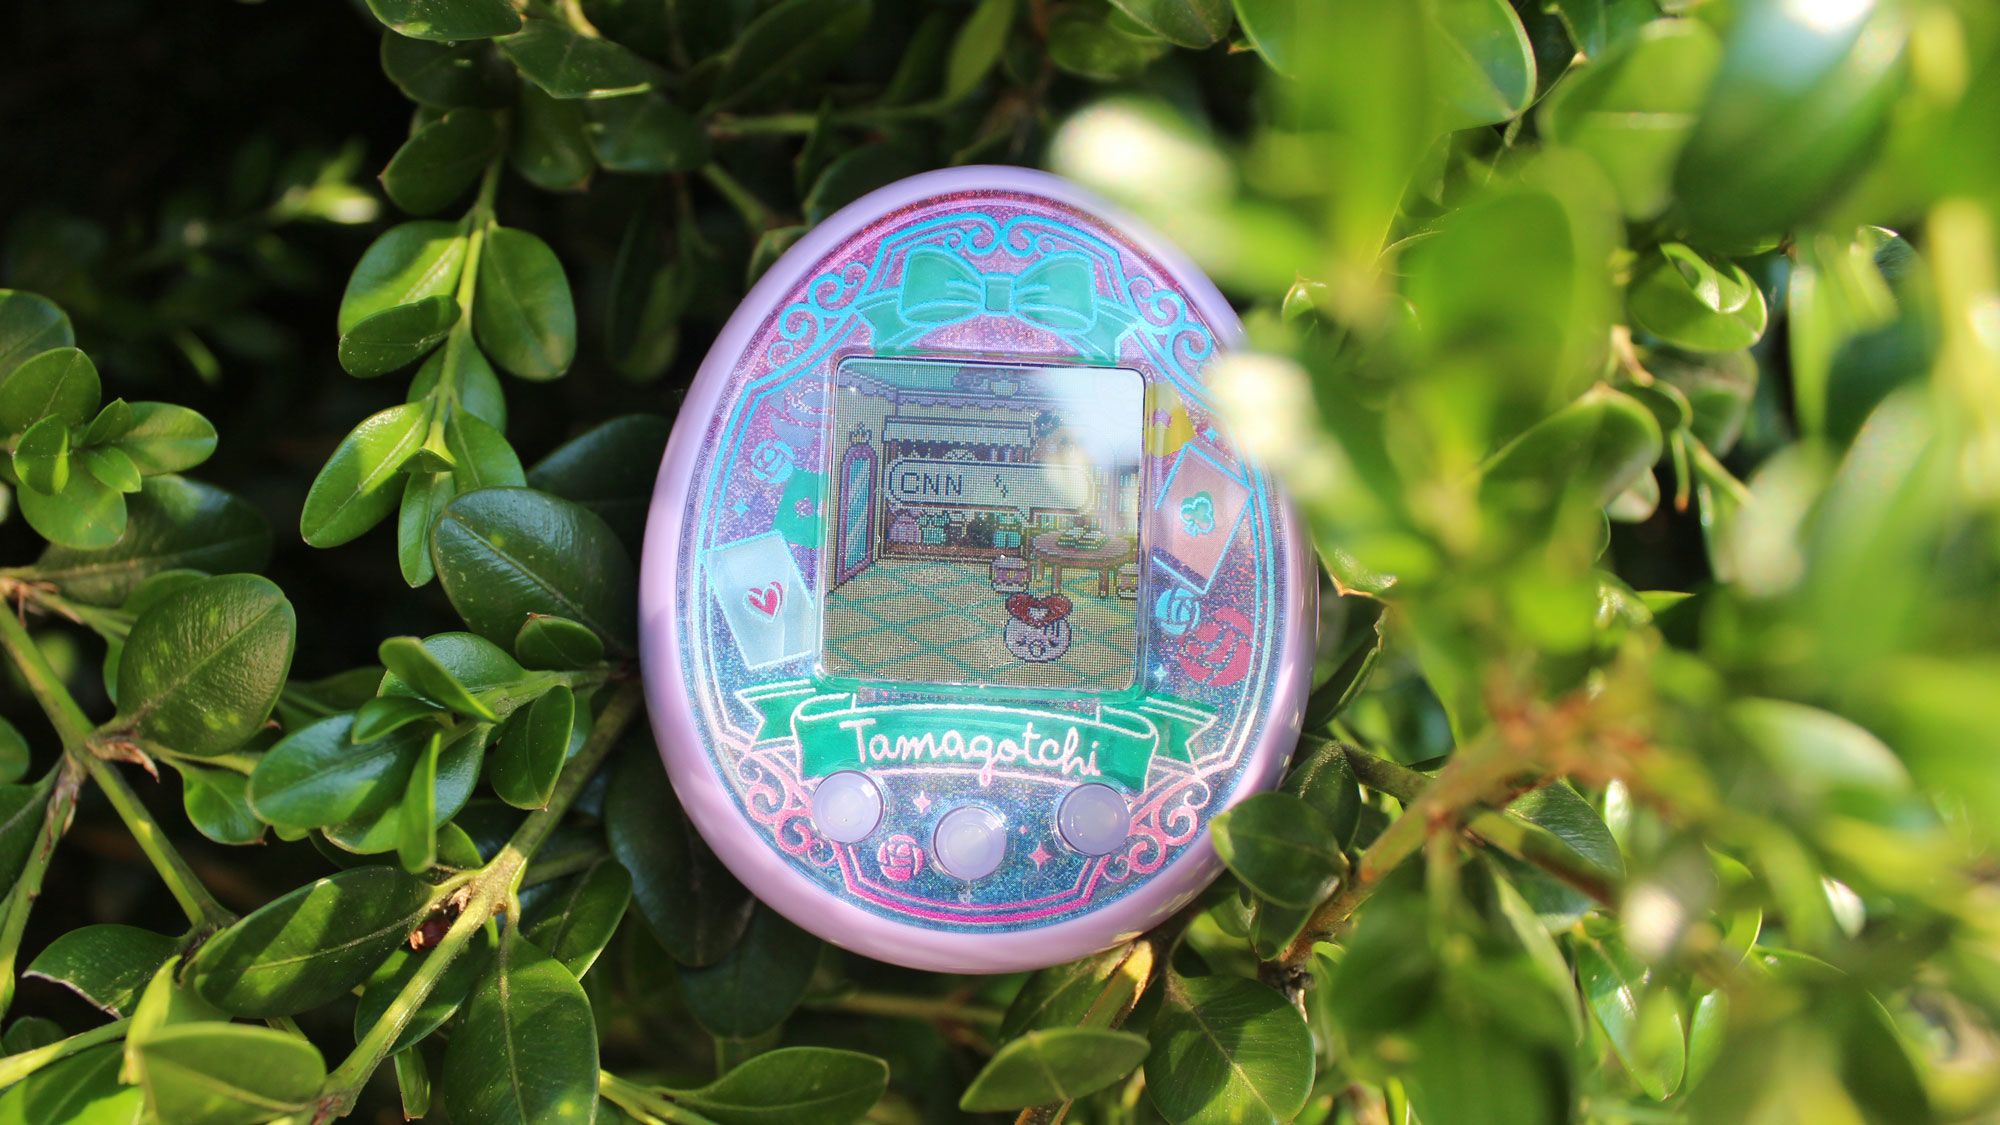 Tamagotchi Have Returned to Bewitch a New Generation